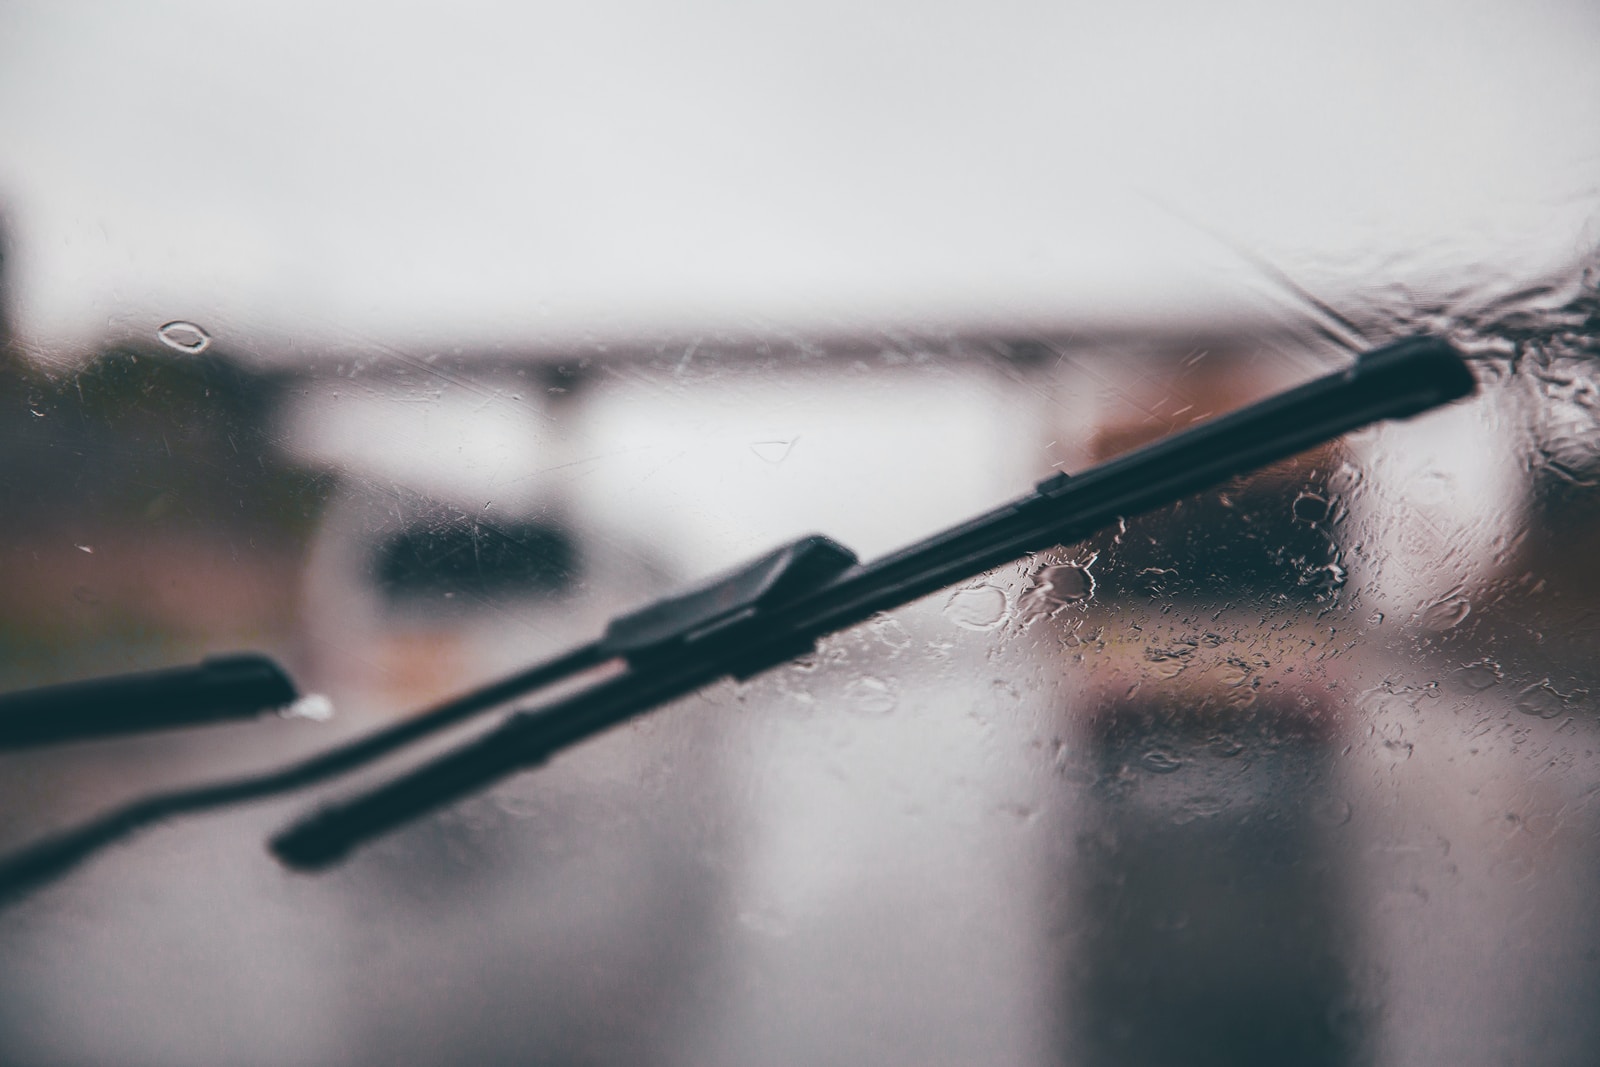 shallow focus photography of black vehicle wiper